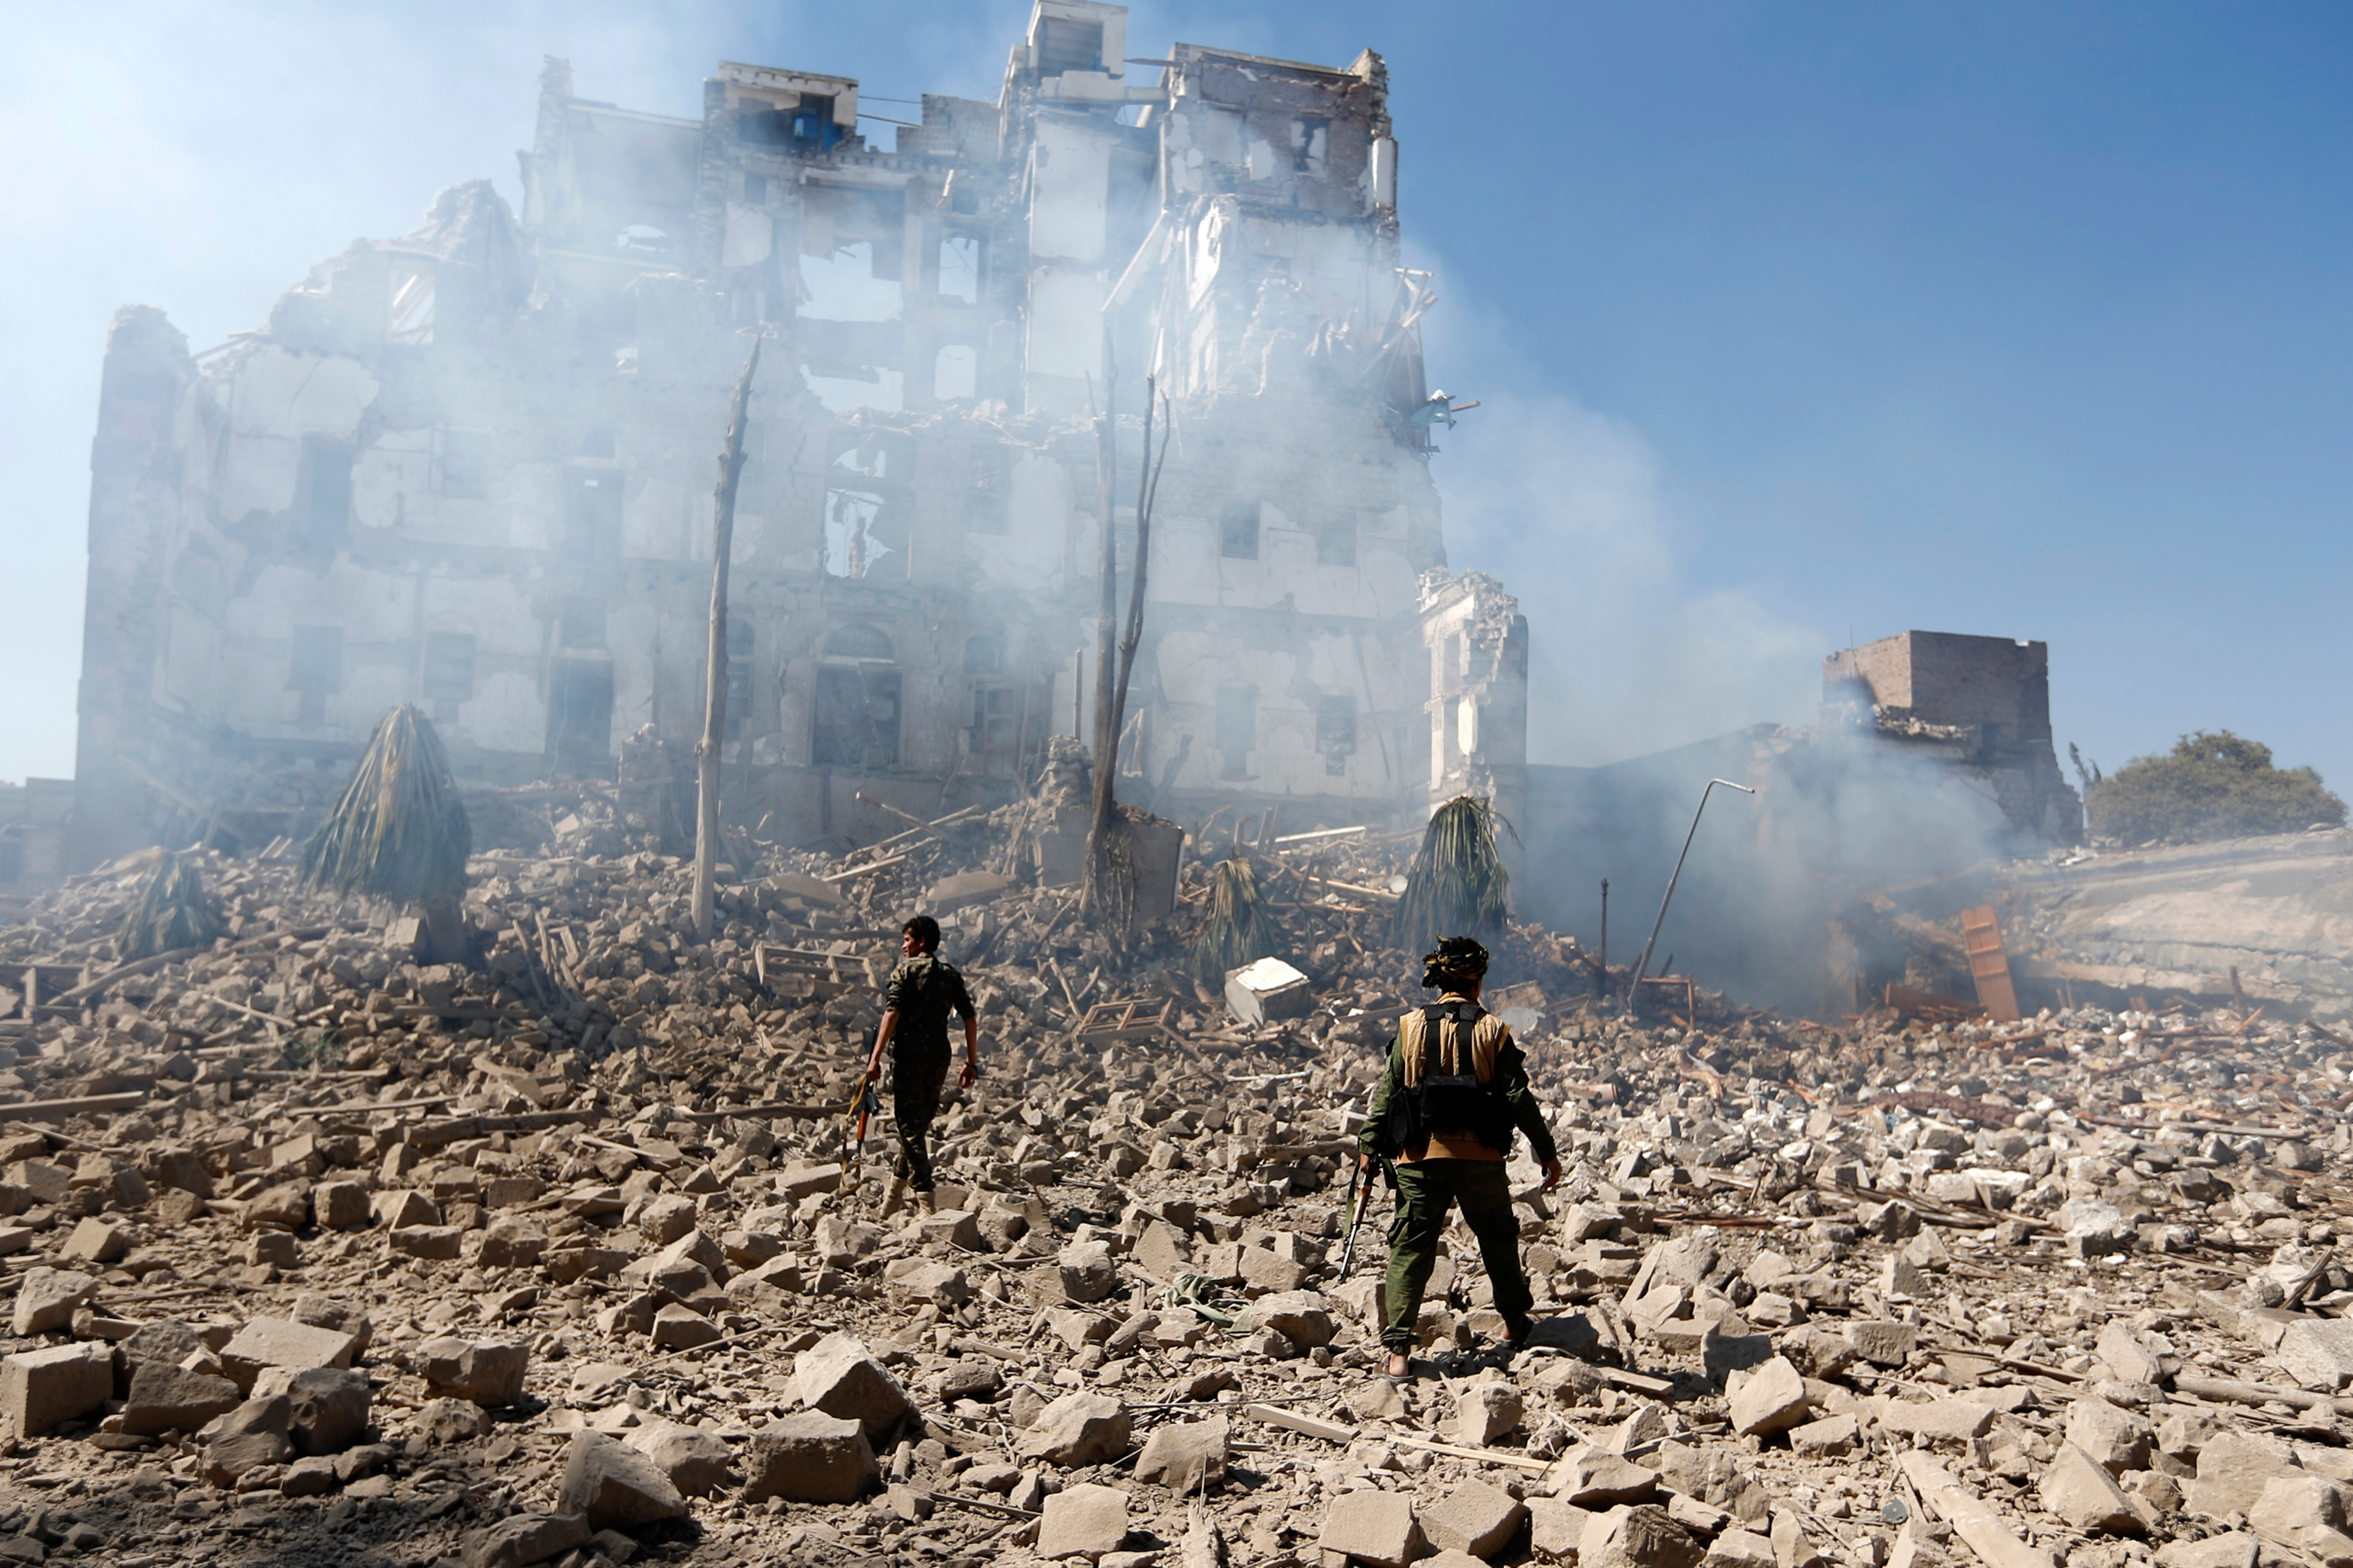 Houthi fighters inspect the site of a reported airstrike by the Saudi-led coalition that targeted Yemen’s presidential palace in Sana‘a on Dec. 5 (Mohammed Huwais—AFP/Getty Images)